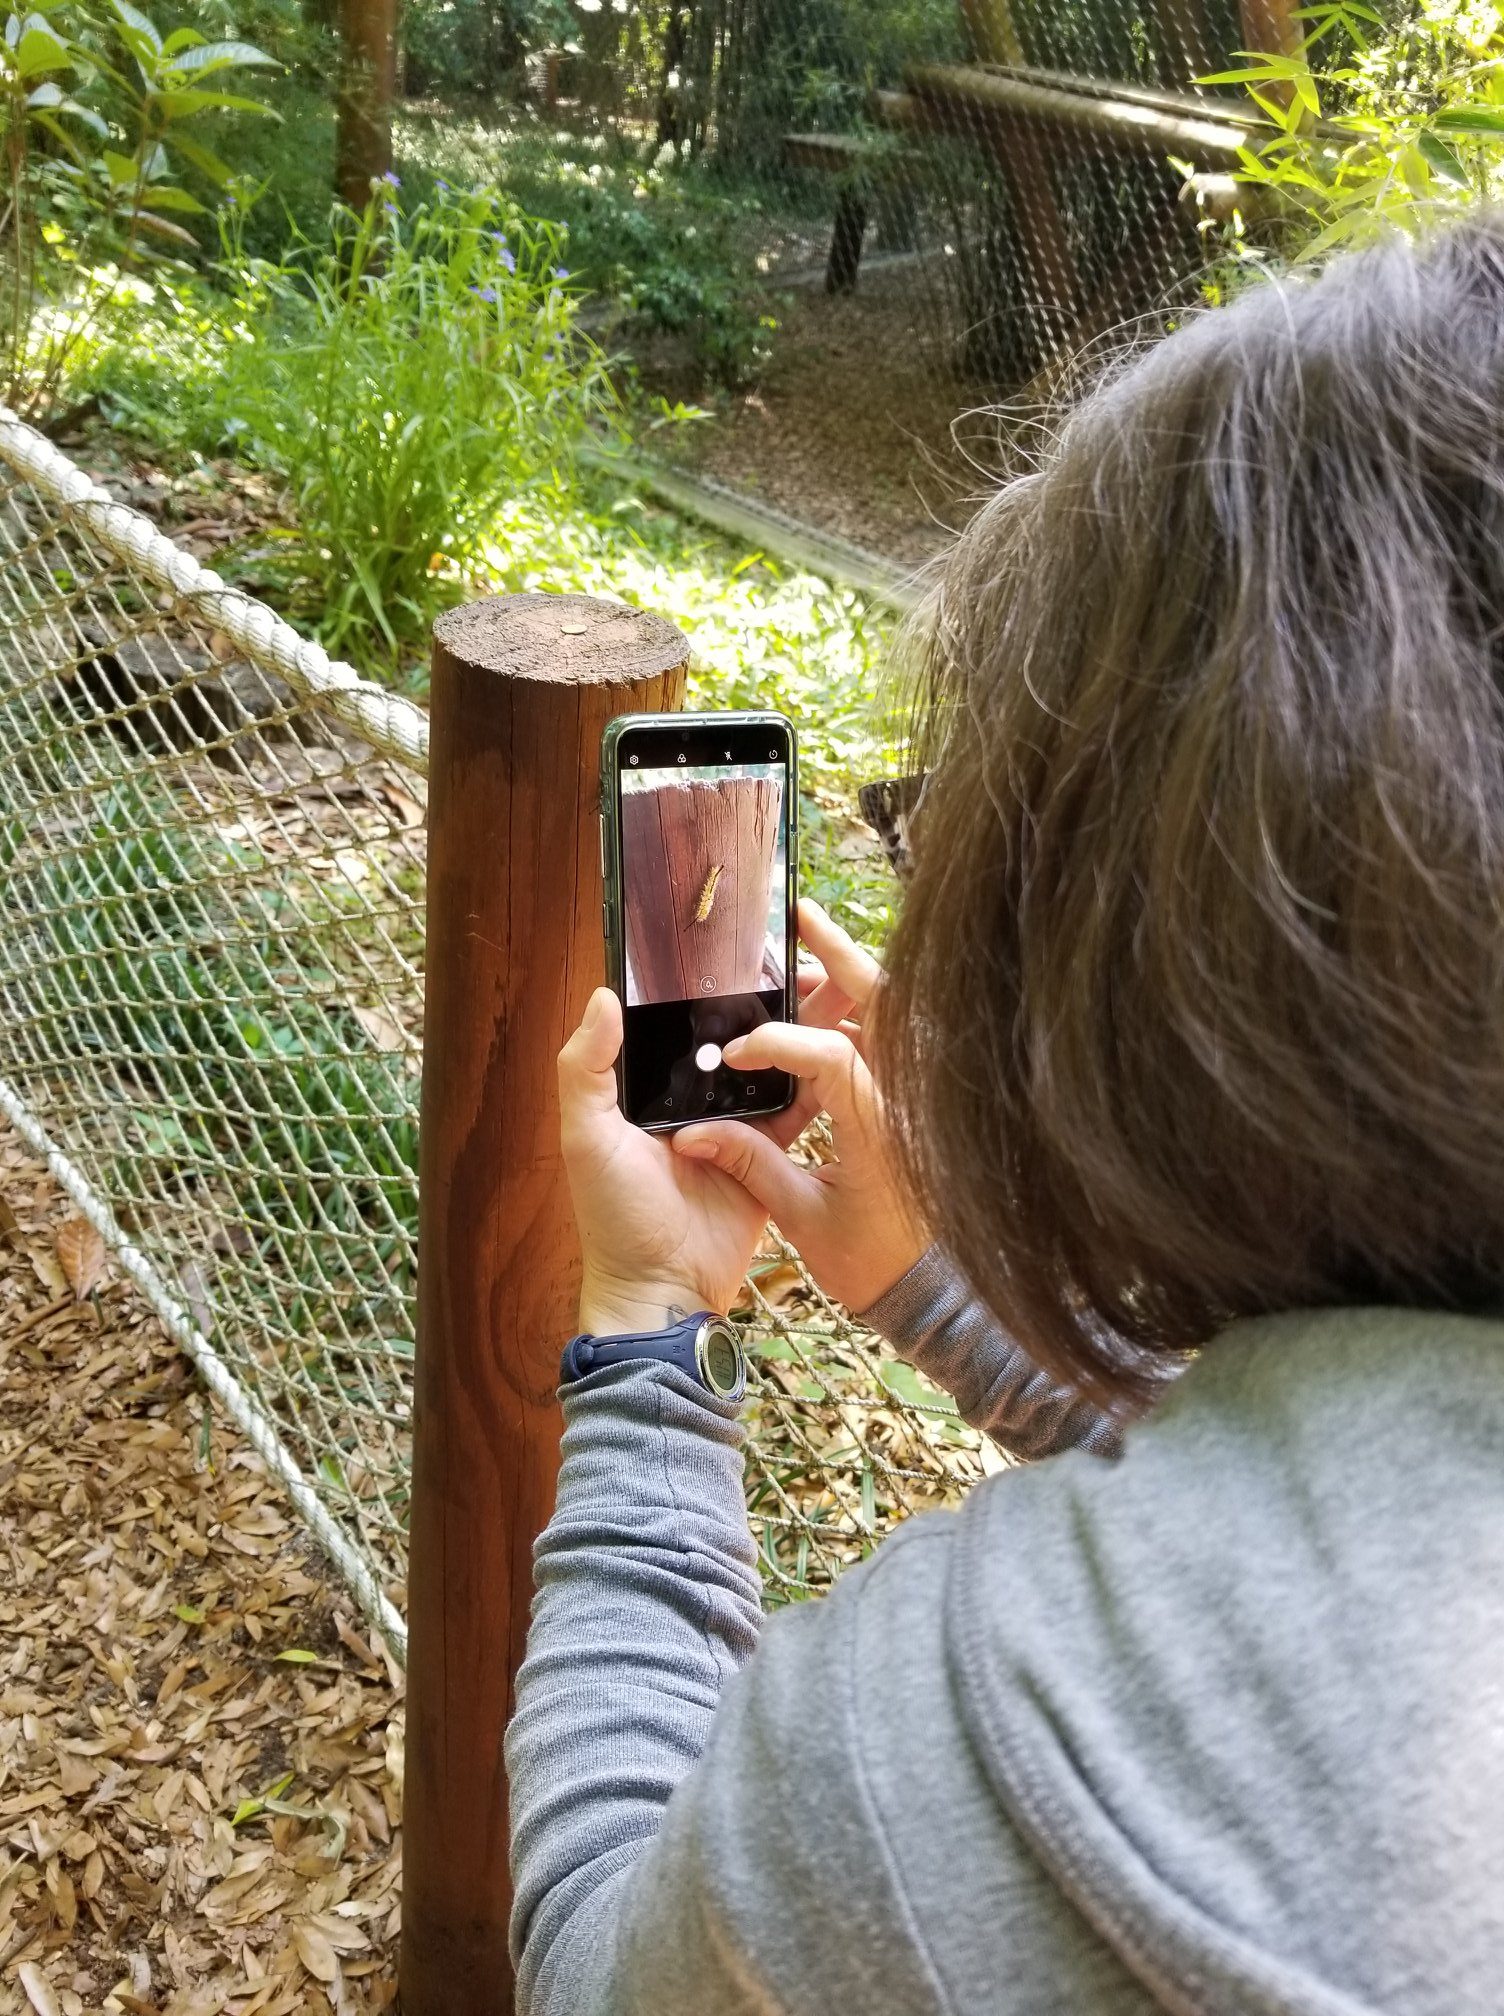 Woman taking a photo of a caterpillar on her phone